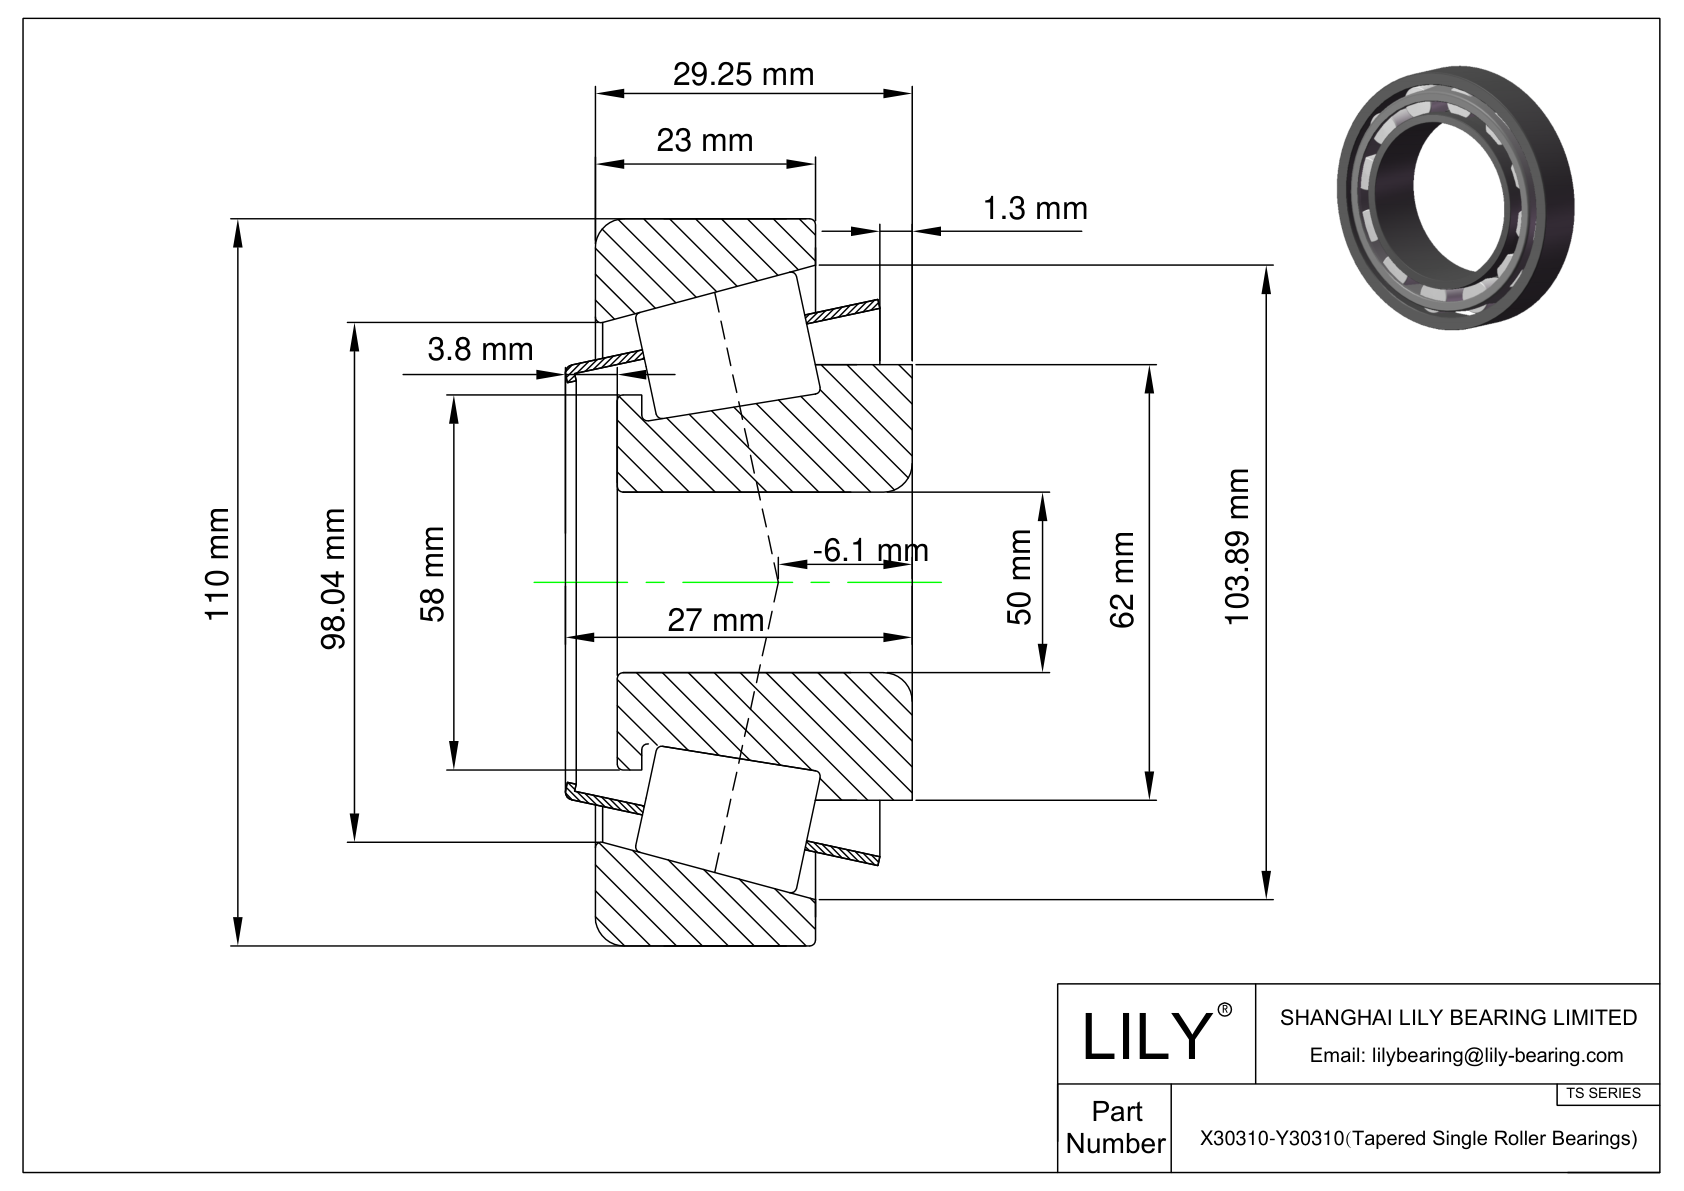 X30310-Y30310 TS (Tapered Single Roller Bearings) (Metric) cad drawing